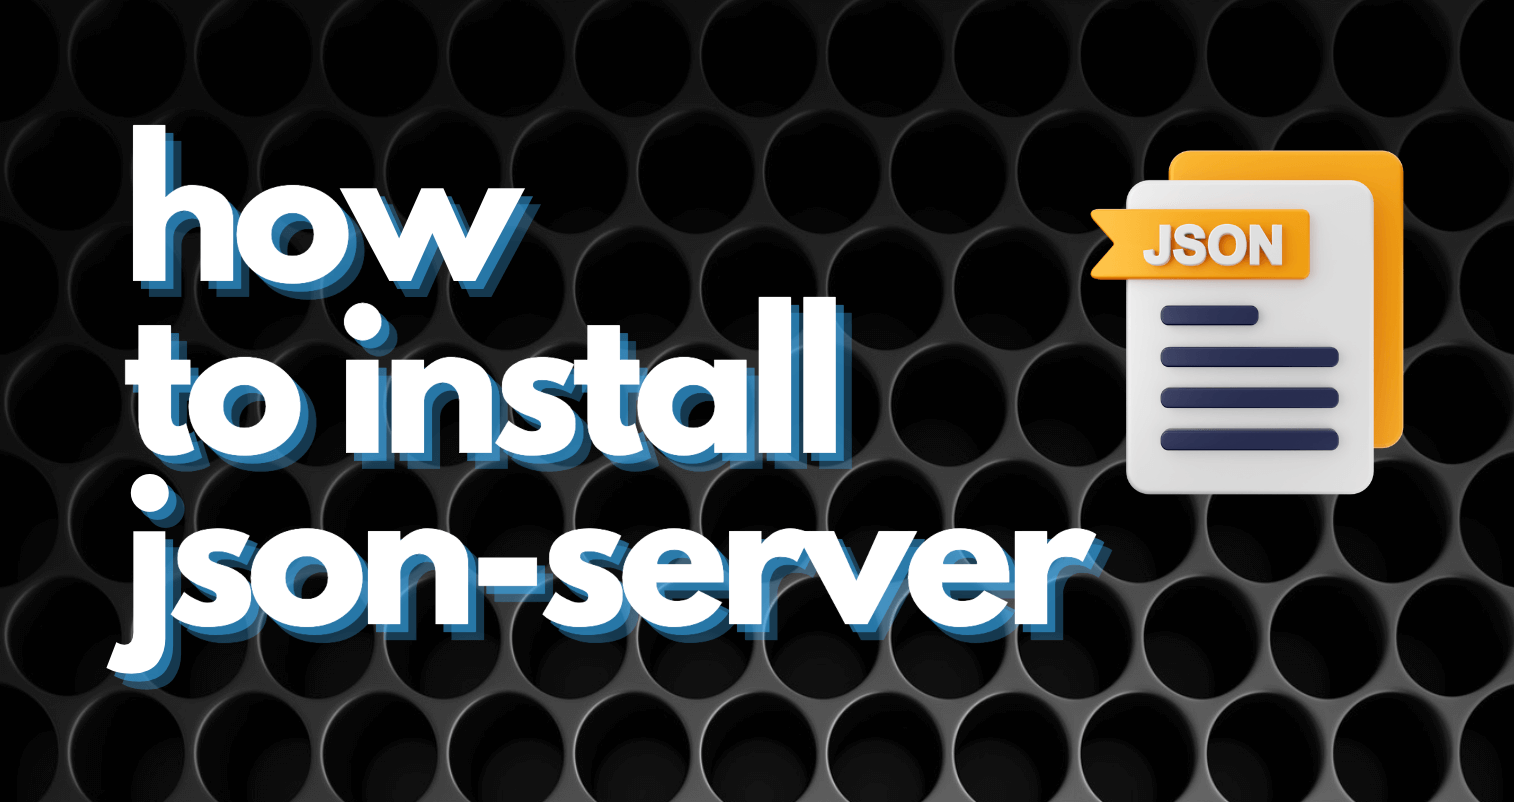 How to Install JSON Server?